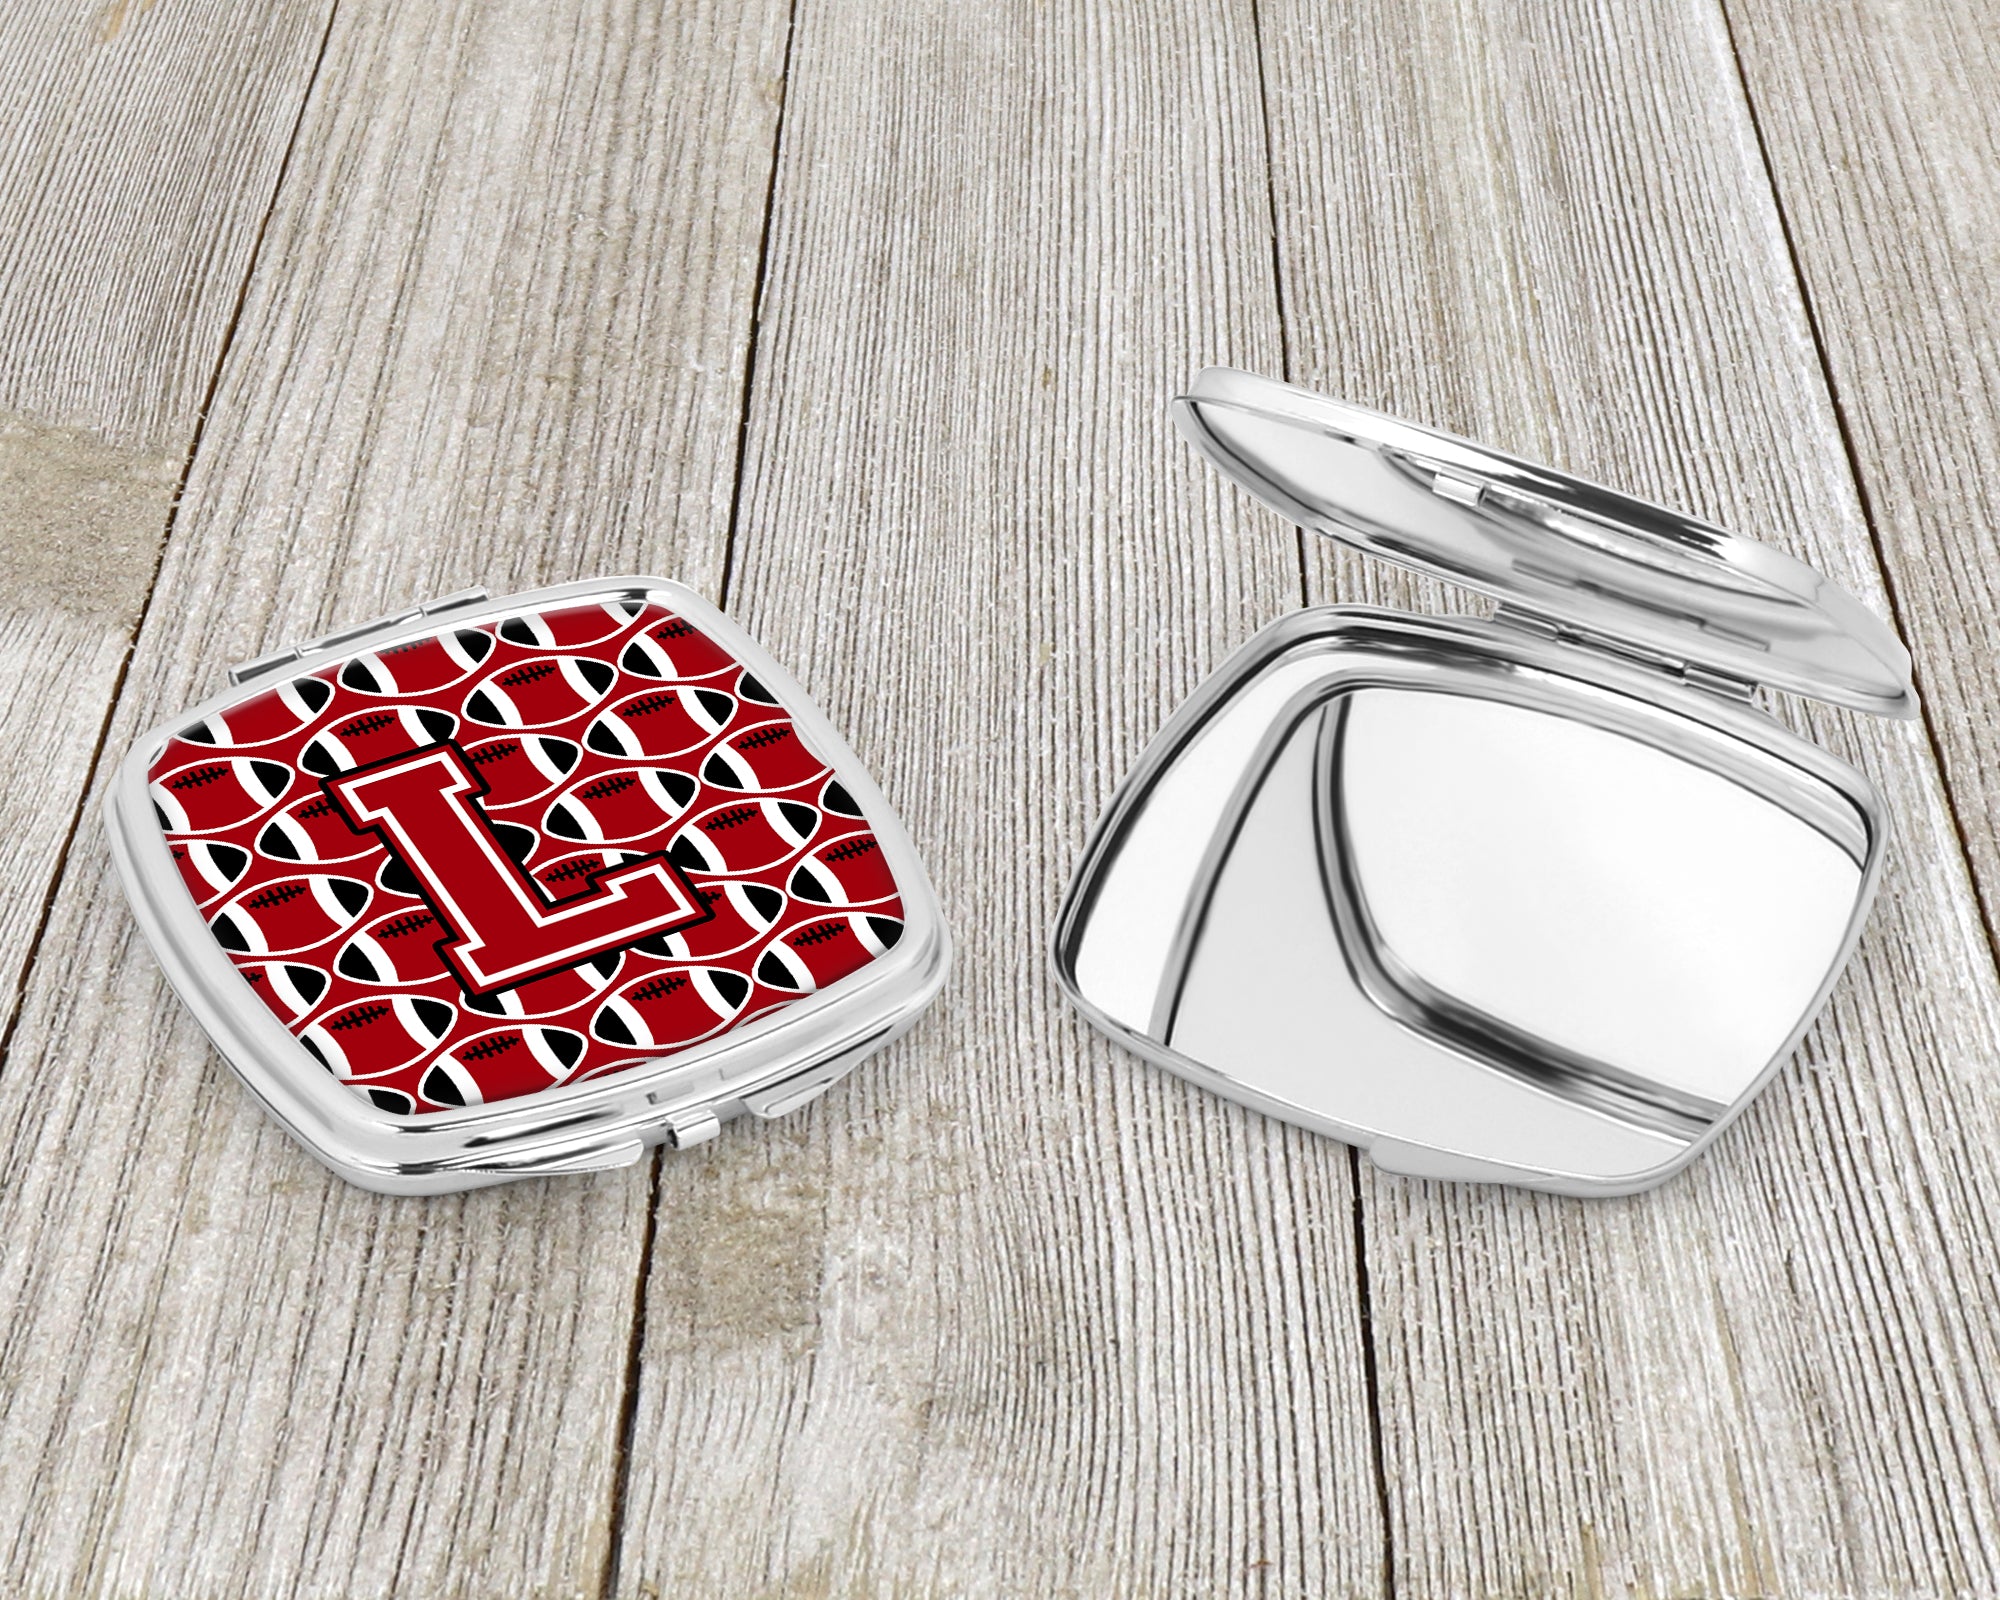 Letter L Football Red, Black and White Compact Mirror CJ1073-LSCM